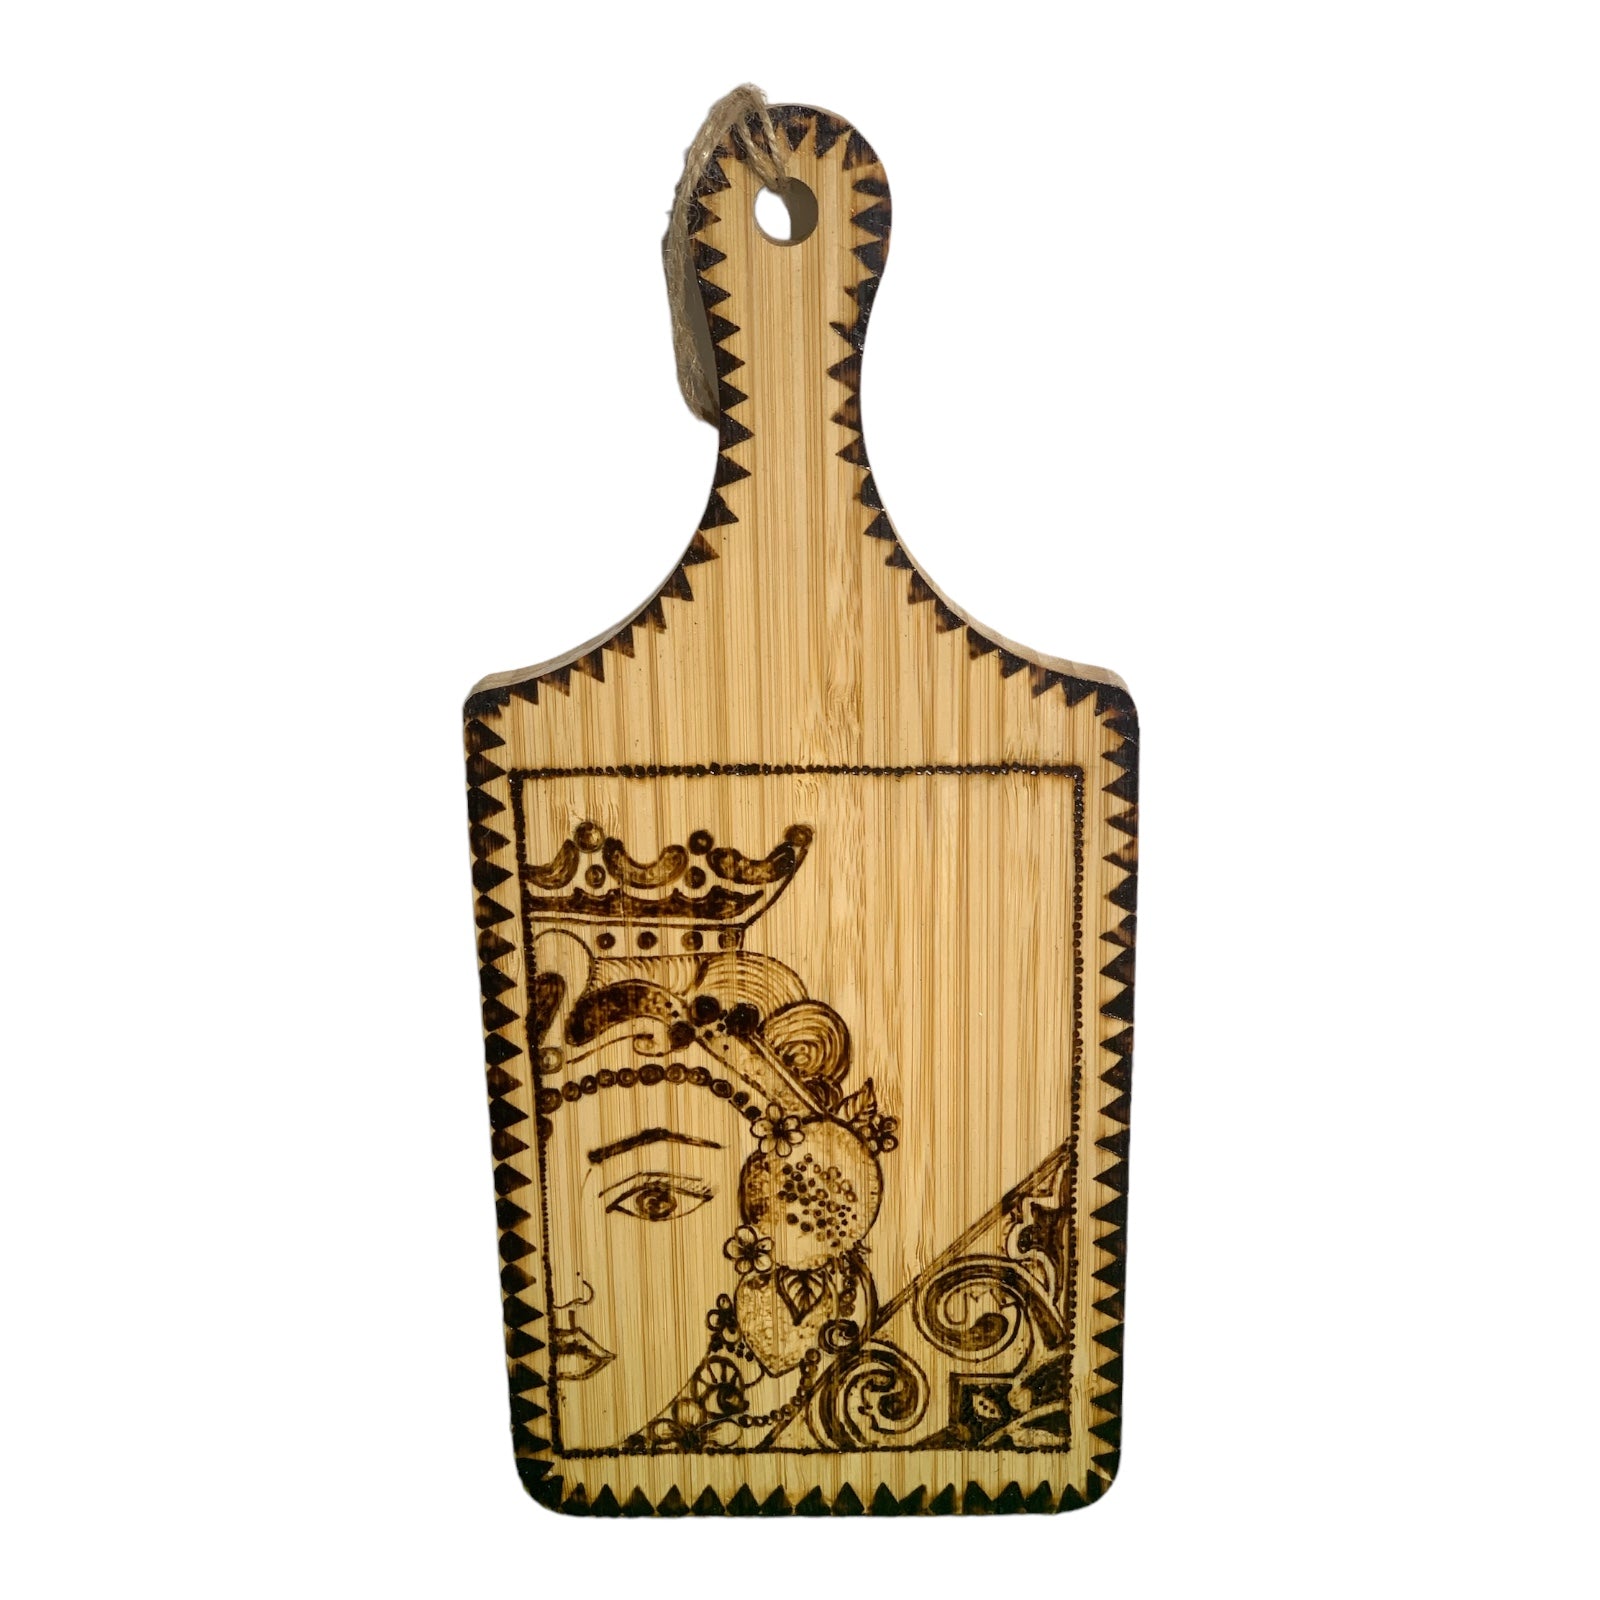 Engraved wooden Board Lady Teste Di Moro Wooden Fired